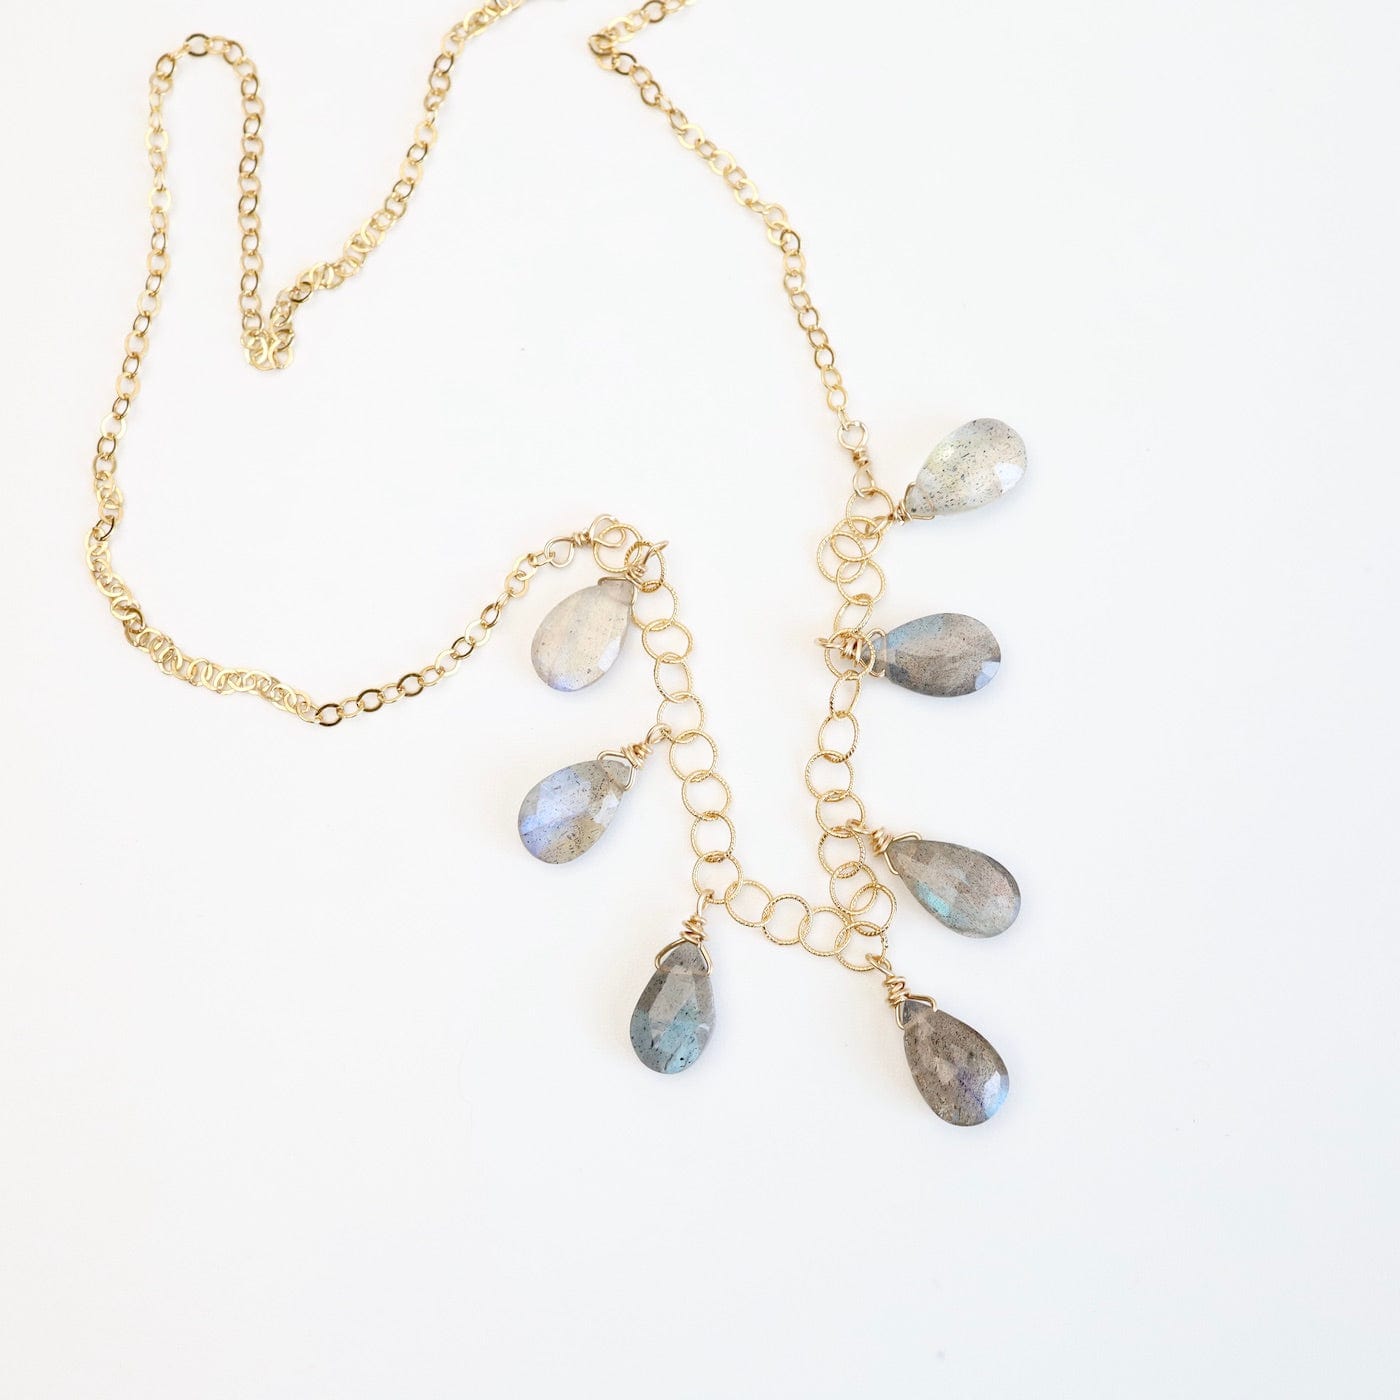 NKL-GF Gold Filled Chain with 7 Labradorite Drops  Necklace